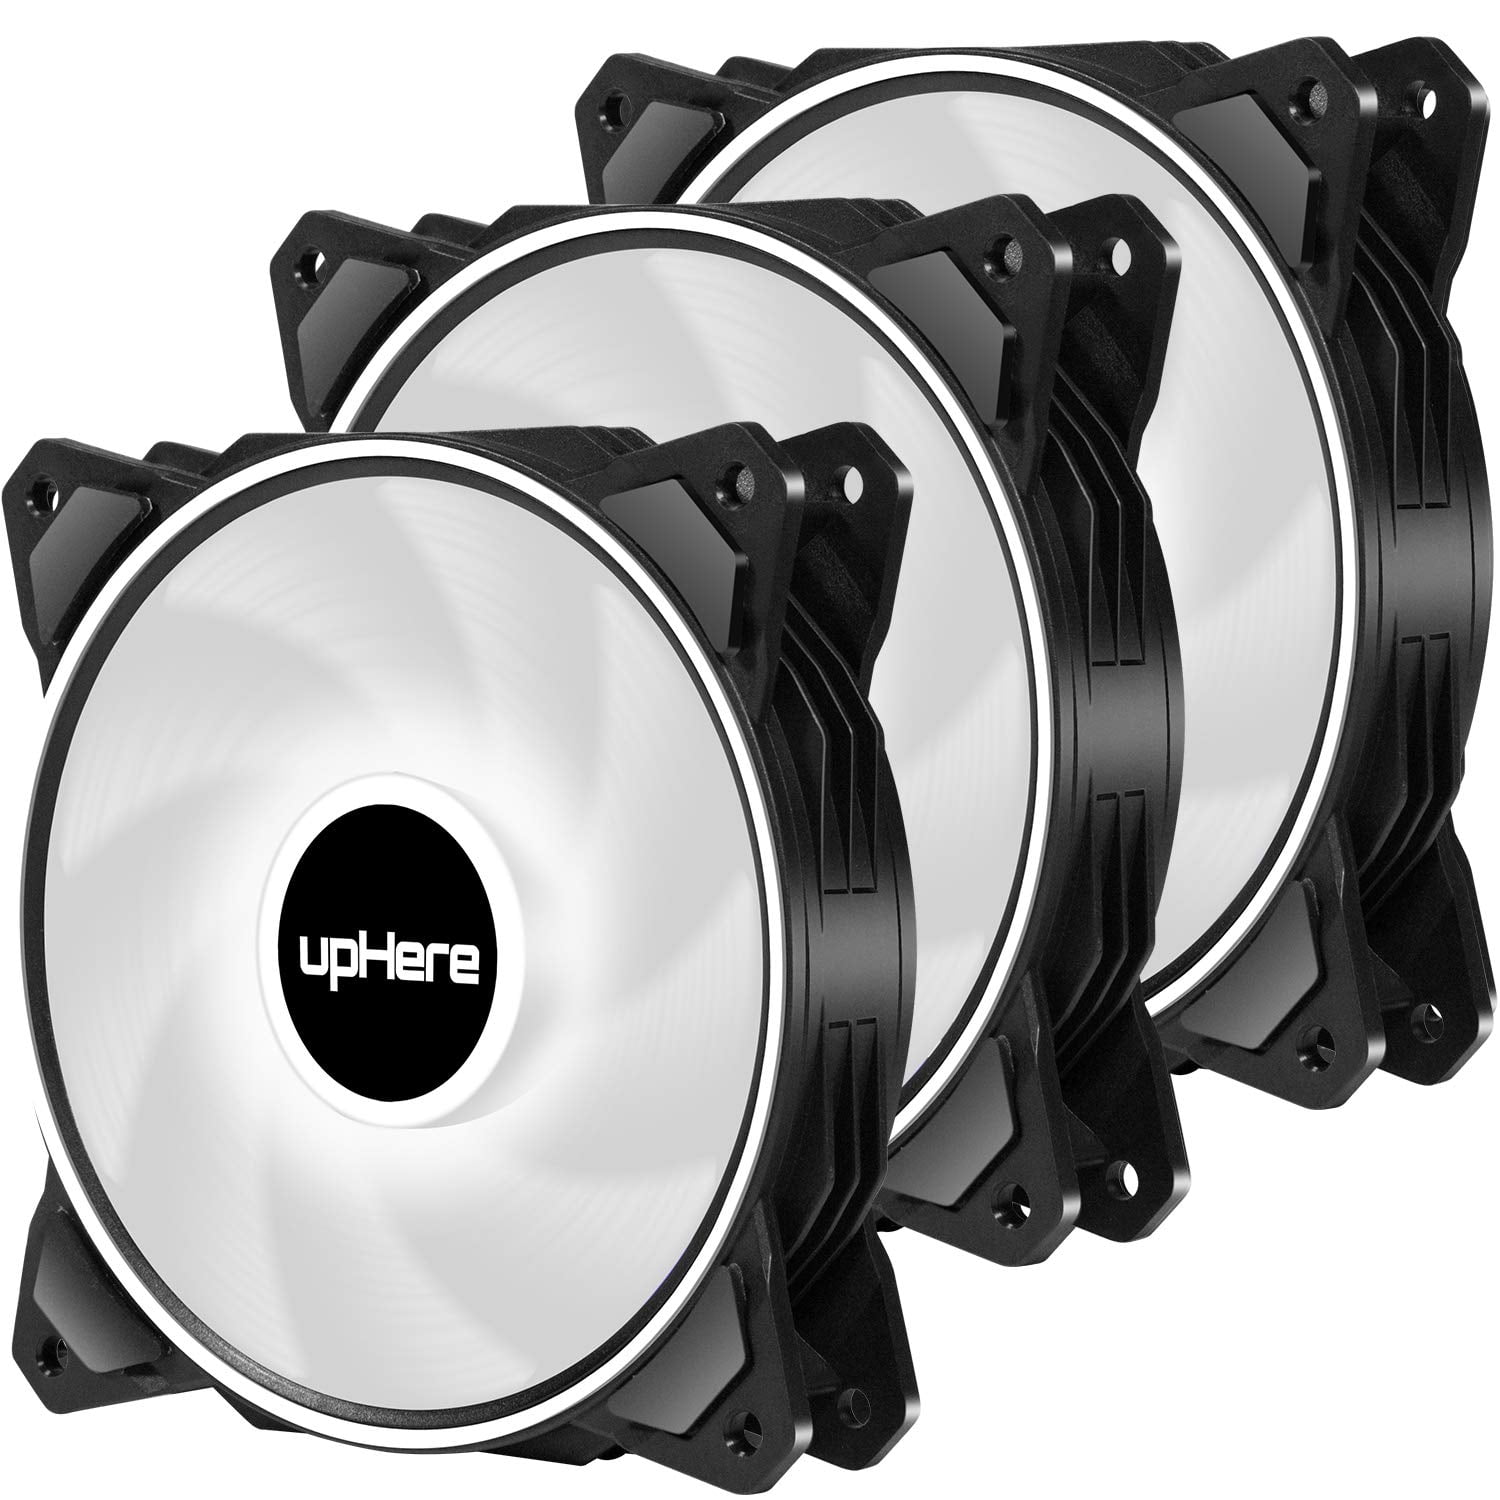 upHere 120mm Case Fan,Silent Case Fan with Dual Light Loop White Light,for Gaming PC,3-pin Connector,3 | Walmart Canada